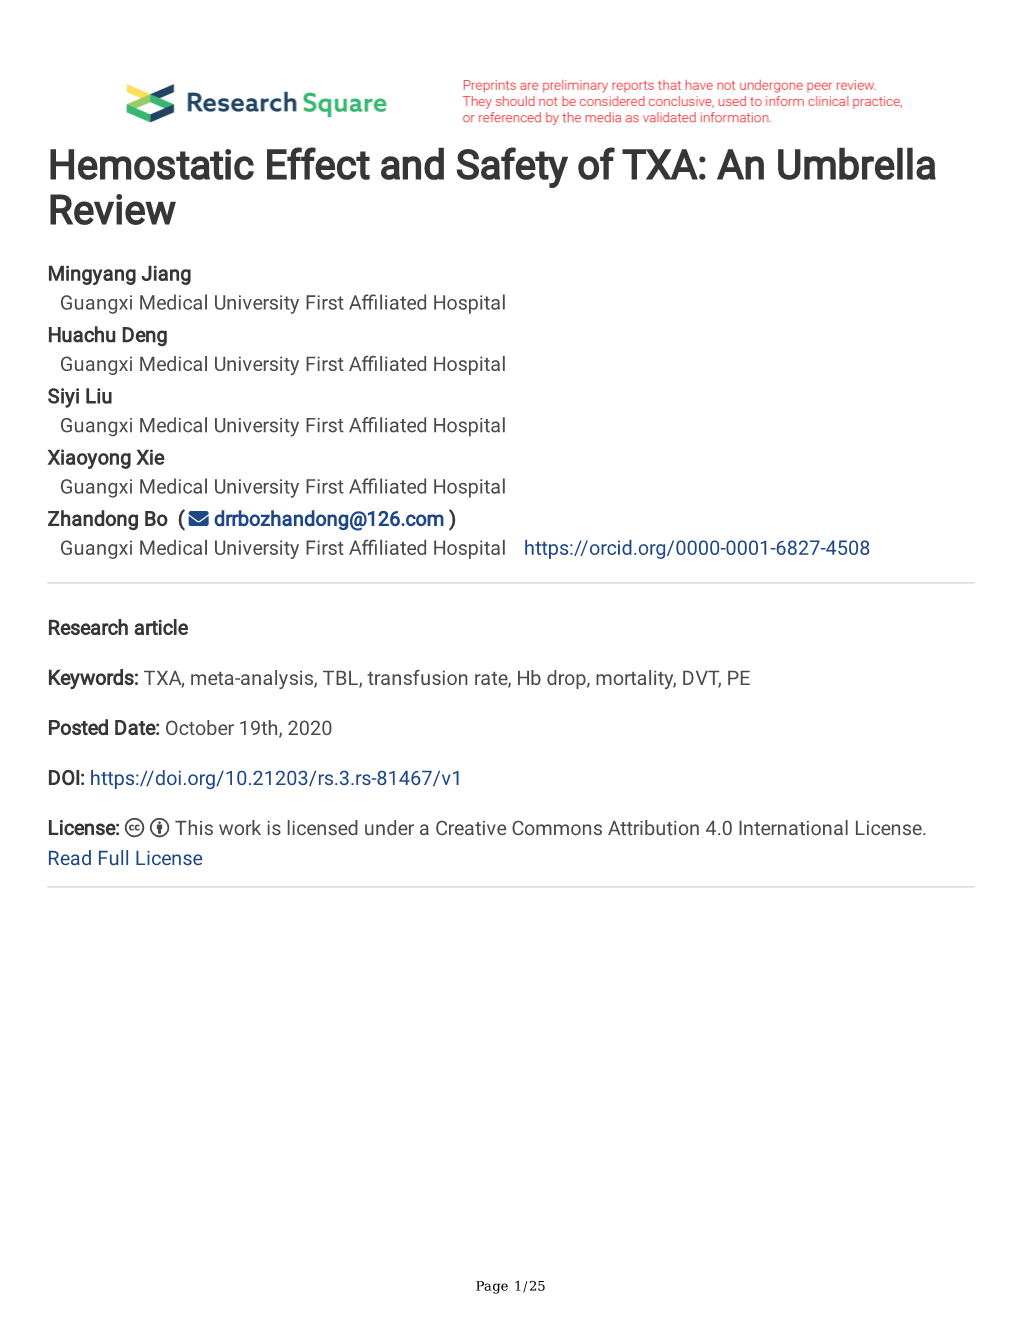 Hemostatic Effect and Safety of TXA: an Umbrella Review